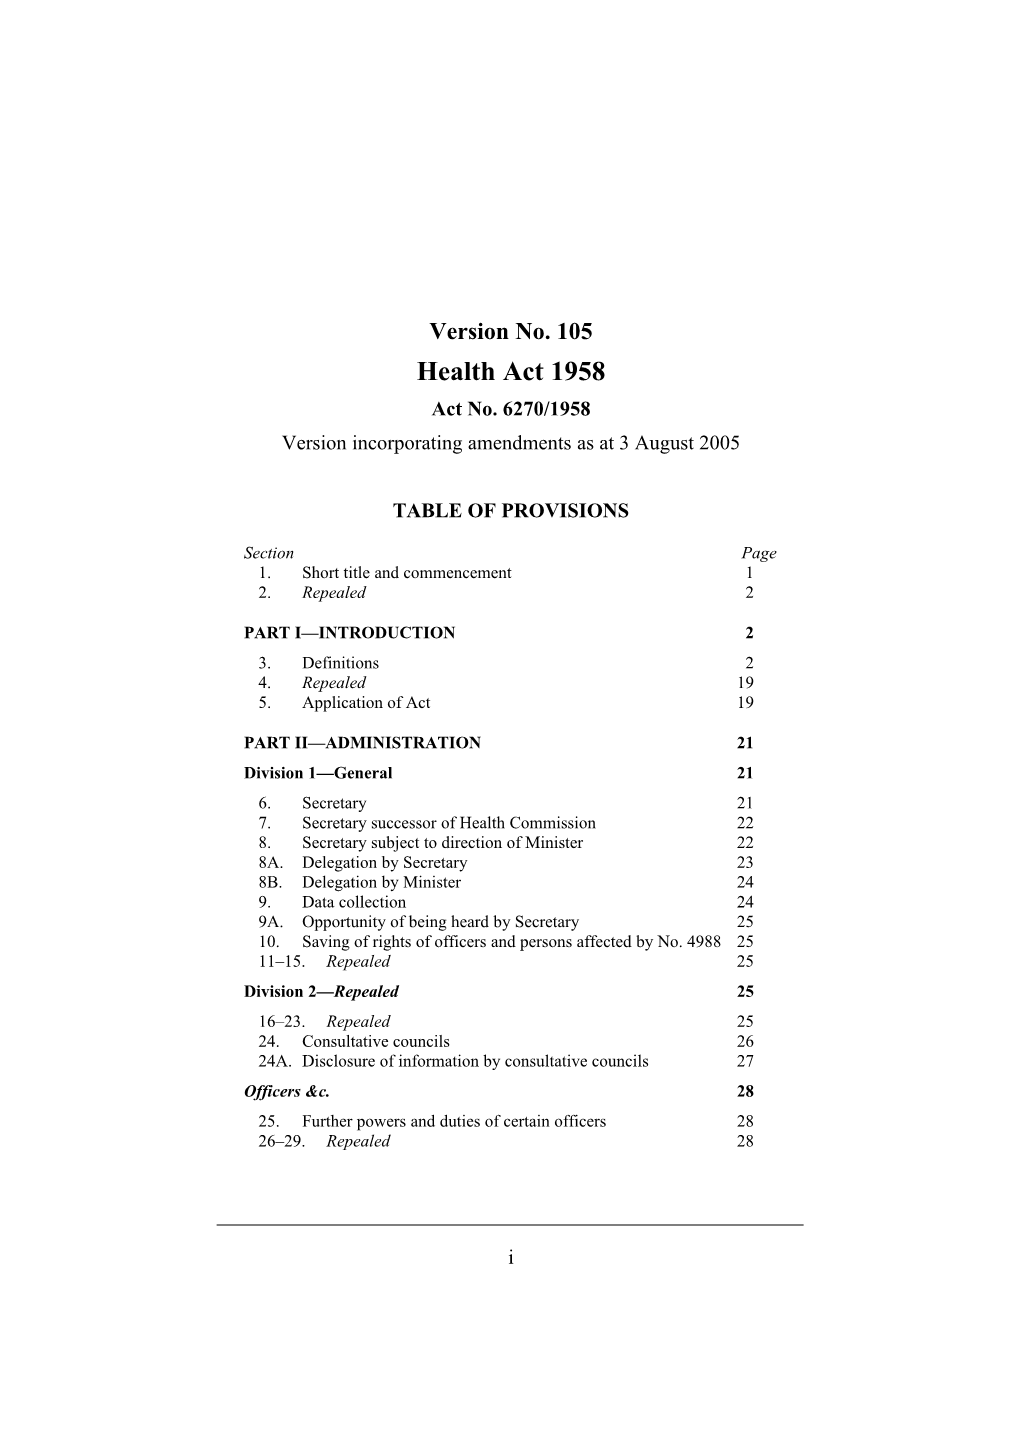 Version Incorporating Amendments As at 3 August 2005